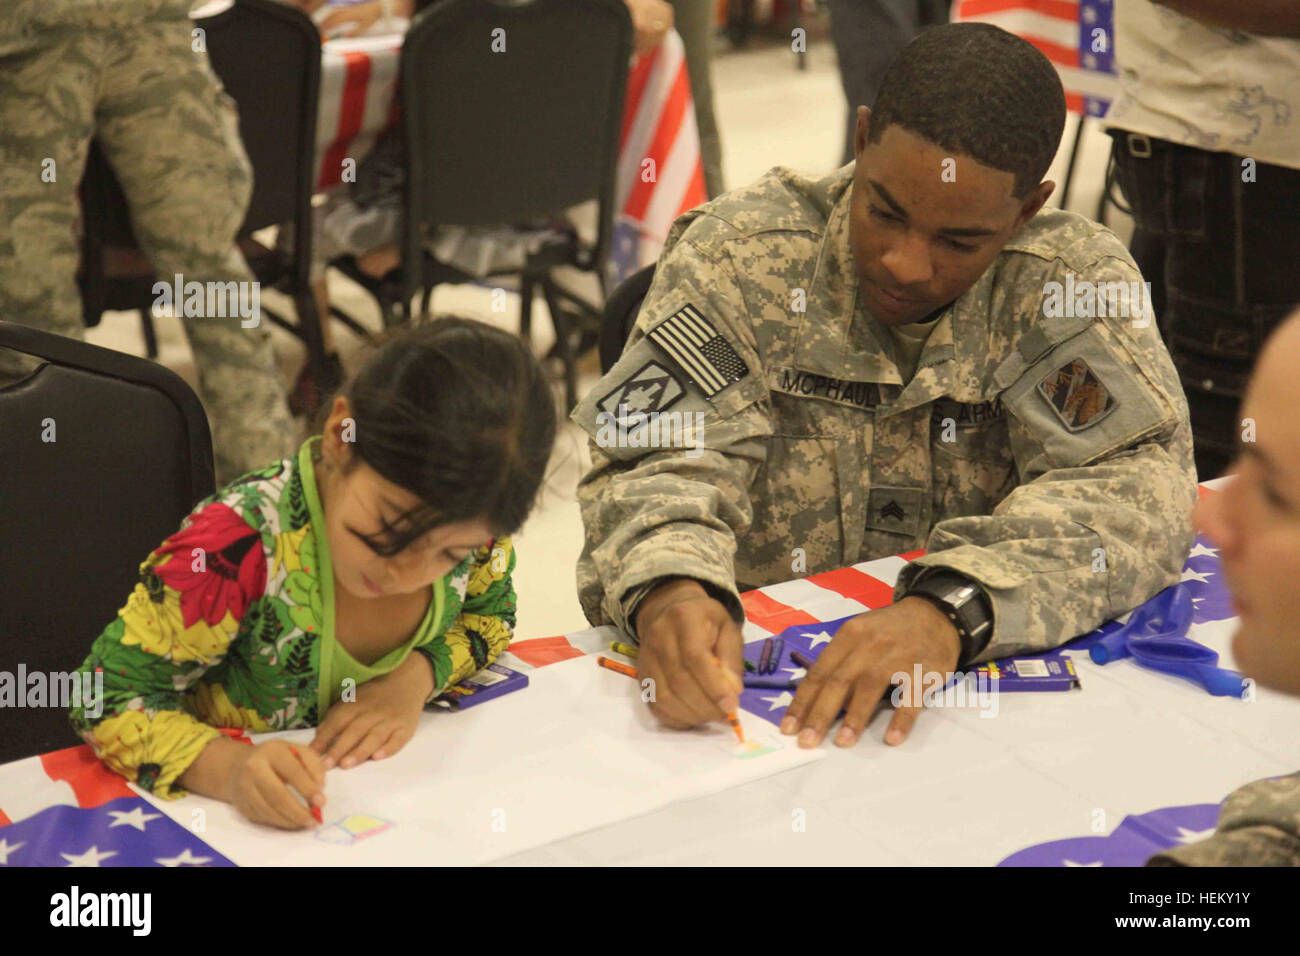 A U.S. Army soldier sits and colors a picture with a young Iraqi girl during Iraqi Kids' Day at Joint Base Balad in Salah Aldin province, Iraq, Oct. 1, 2011. The purpose of Iraqi Kids' Day is to build positive relations with Iraqi children, let them know that the U.S. forces in Iraq are friendly and are here to help the well-being of Iraq's citizens. All these soldiers and airmen are in Iraq in support of Operation New Dawn. (Photo by Pfc. Nikko-Angelo Matos) Iraqi Kids' Day 111001-A-YV529-014 Stock Photo